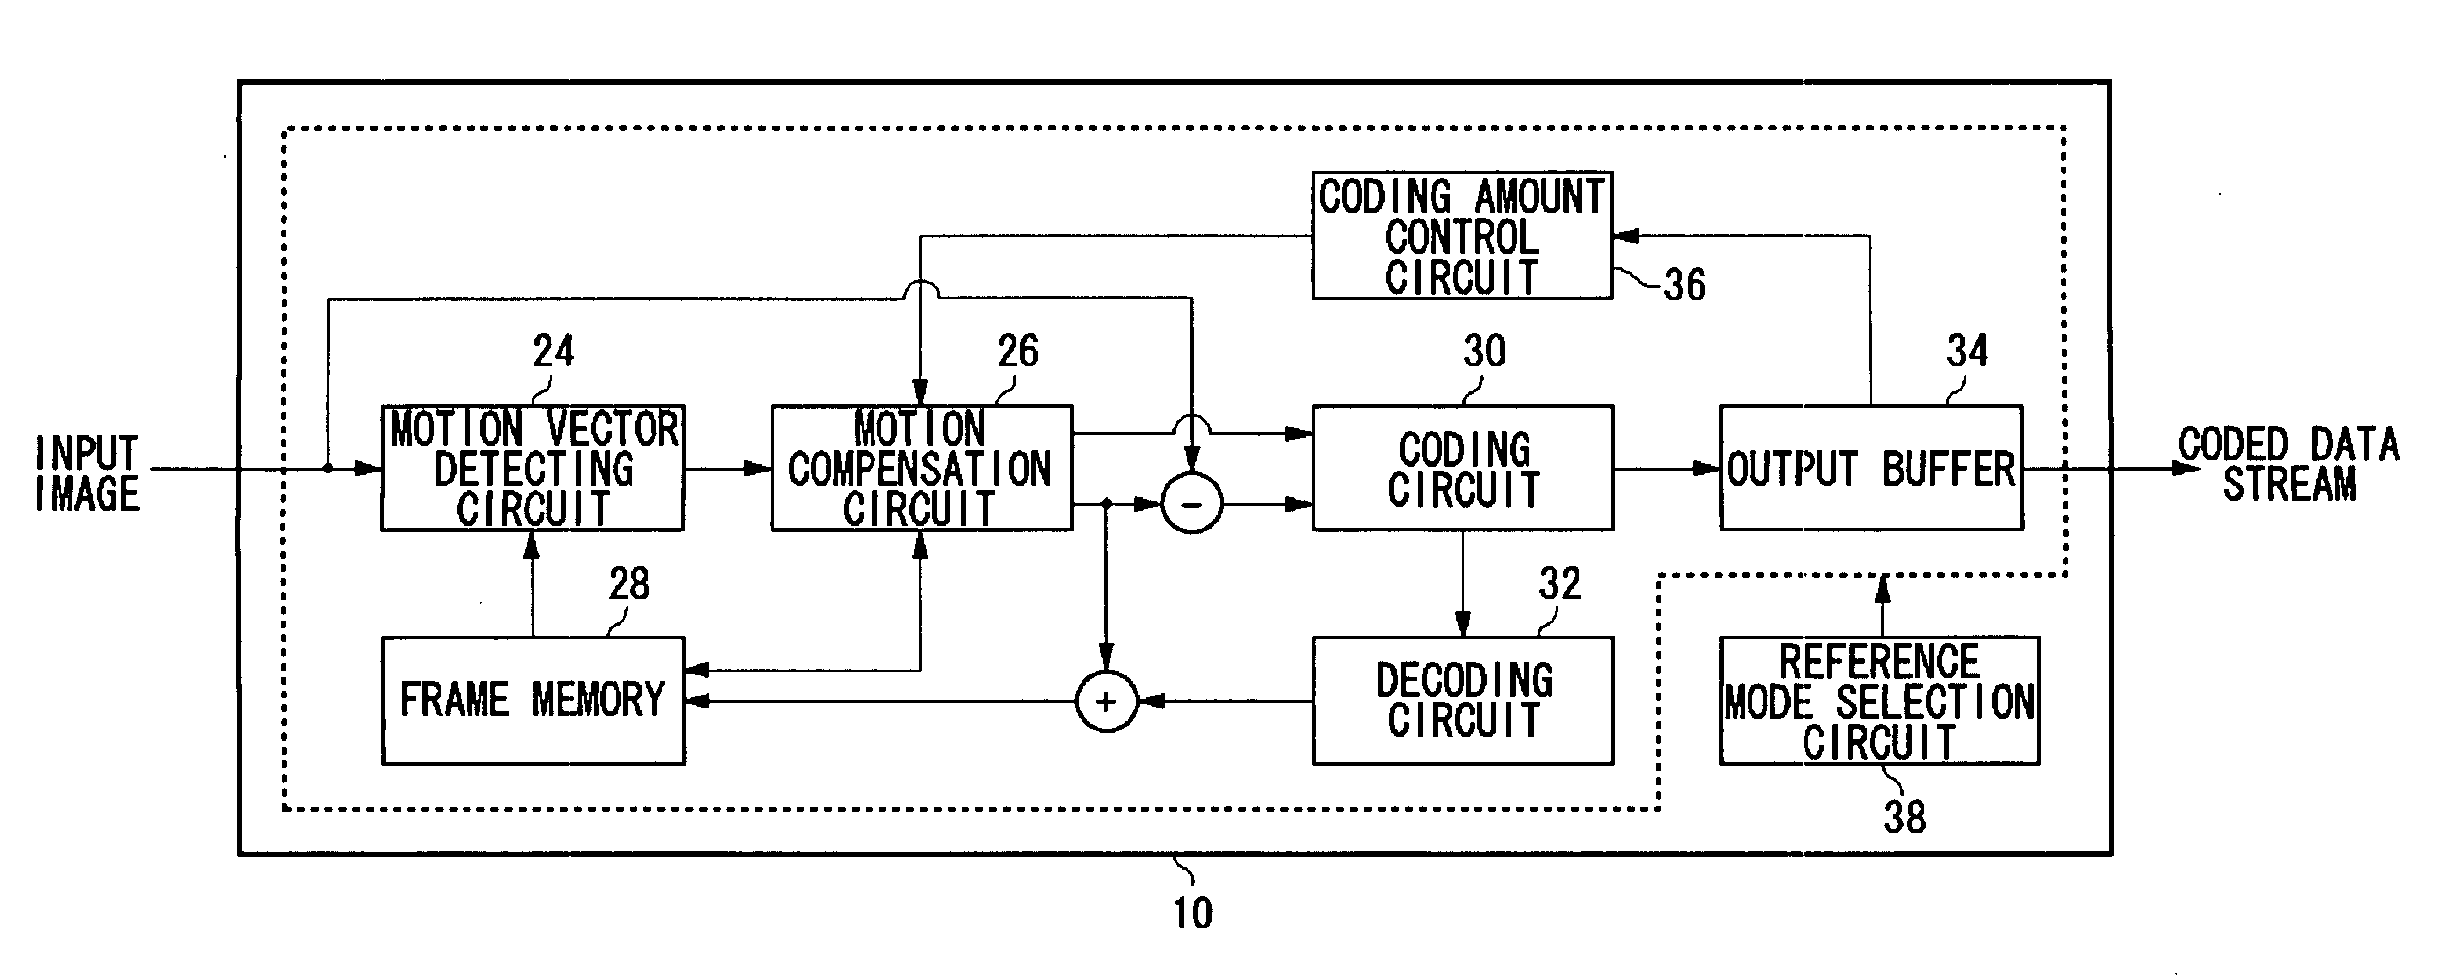 Motion vector detecting device